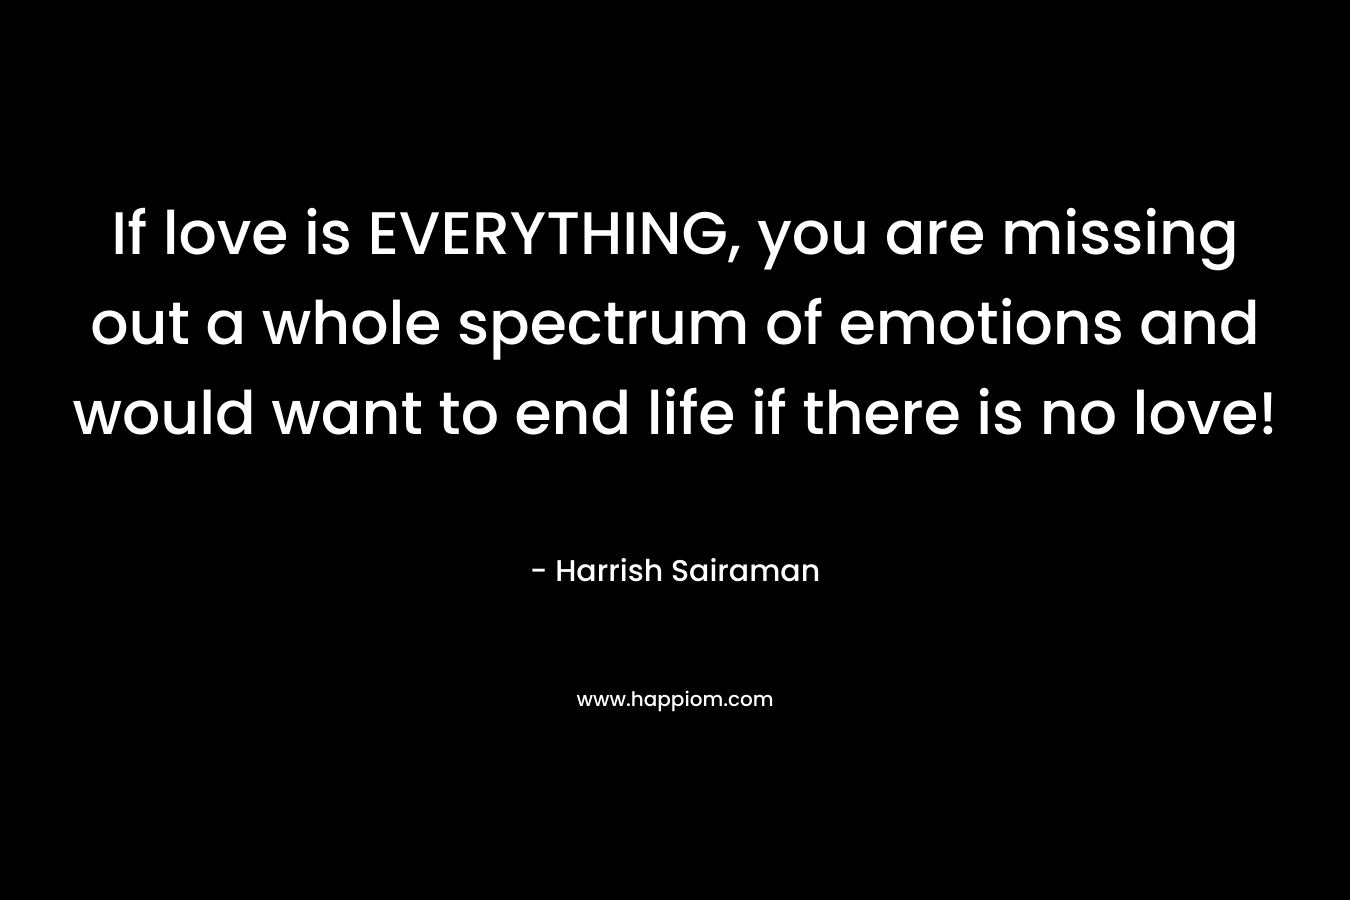 If love is EVERYTHING, you are missing out a whole spectrum of emotions and would want to end life if there is no love! – Harrish Sairaman